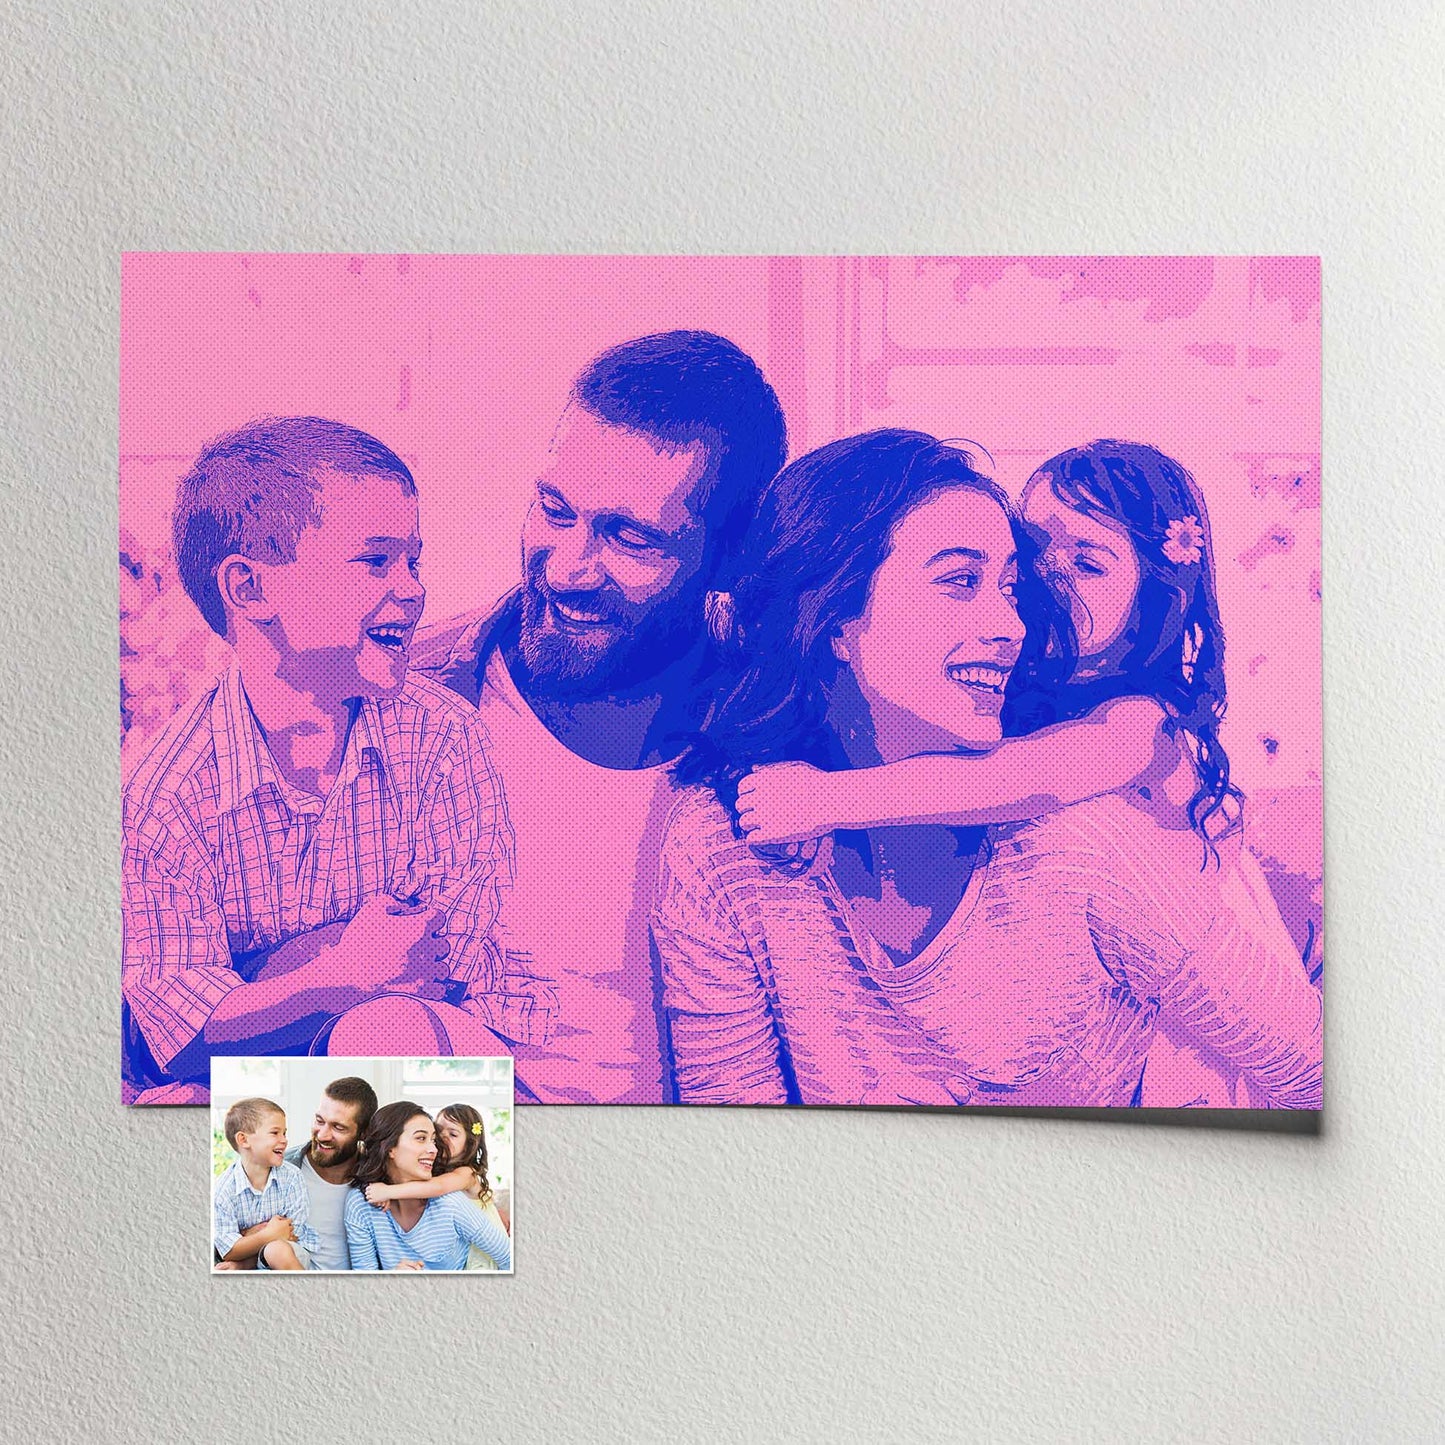 Embrace the charm of old school comics with our Purple & Pink Comics Print. This personalised cartoon-style artwork, made from your photo, showcases a retro comics effect that brings back nostalgia and cool vibes